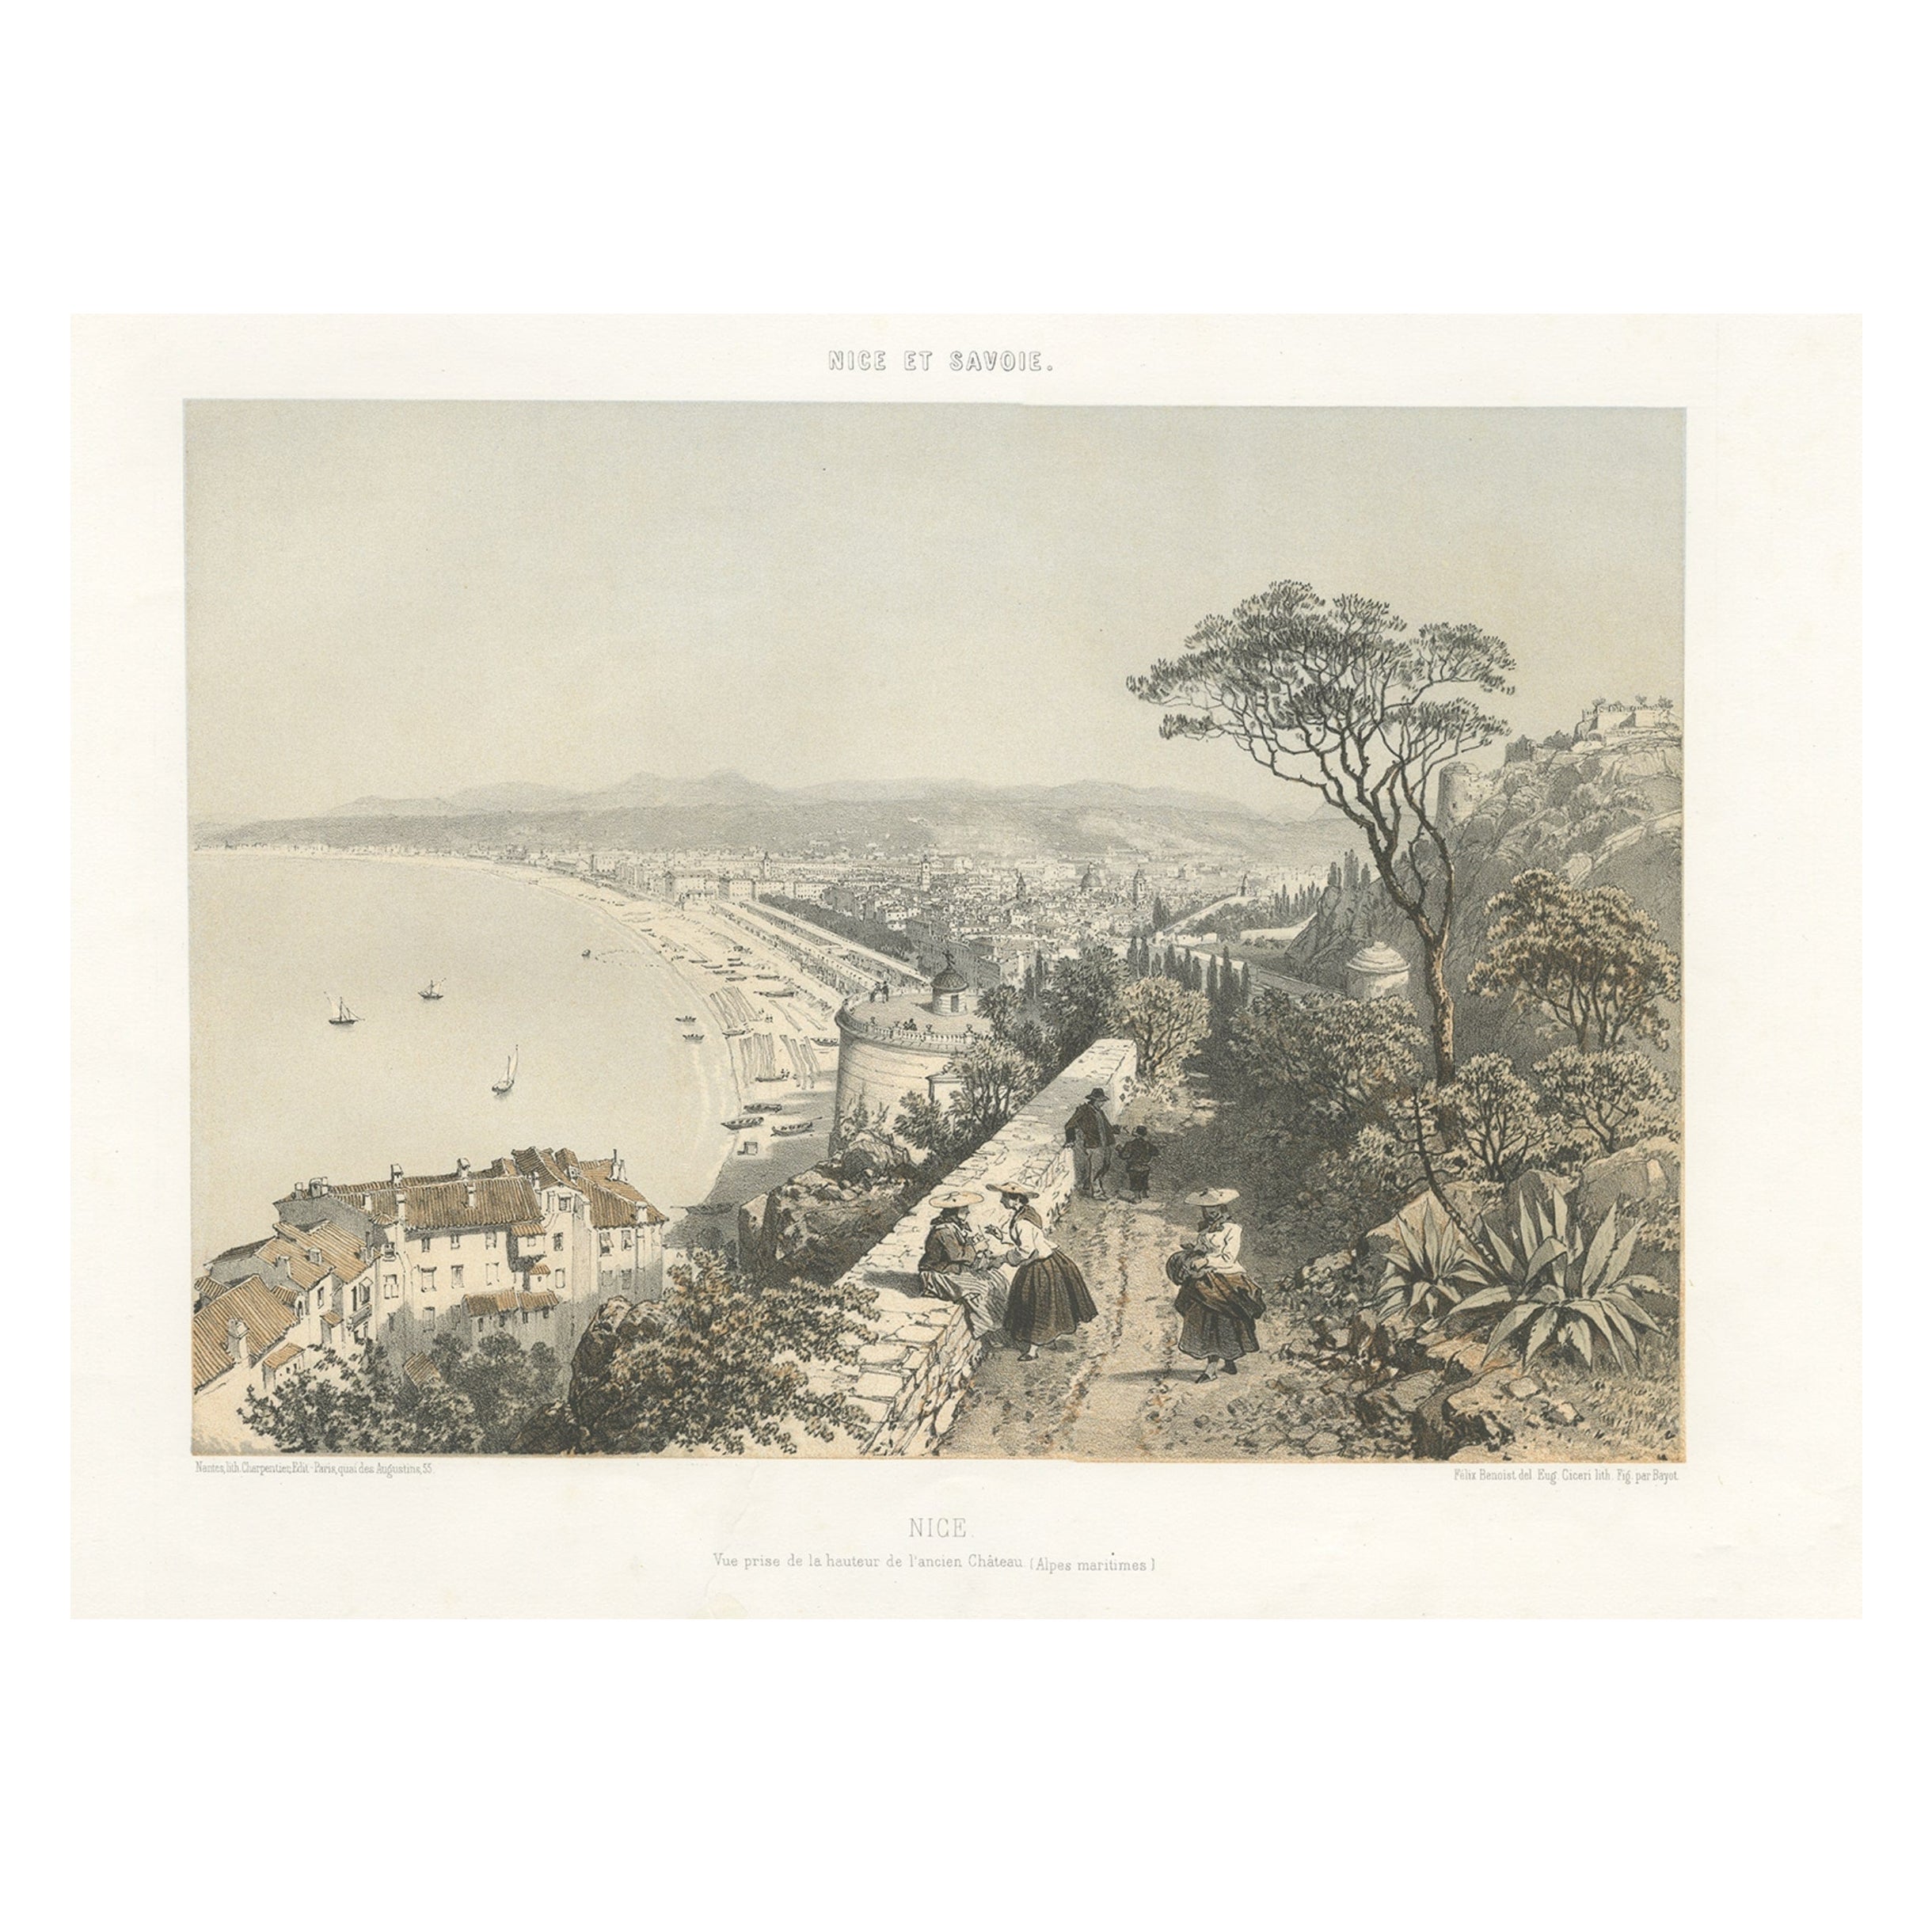 Antique View of the City of Nice on the South-Coast of France, c.1865